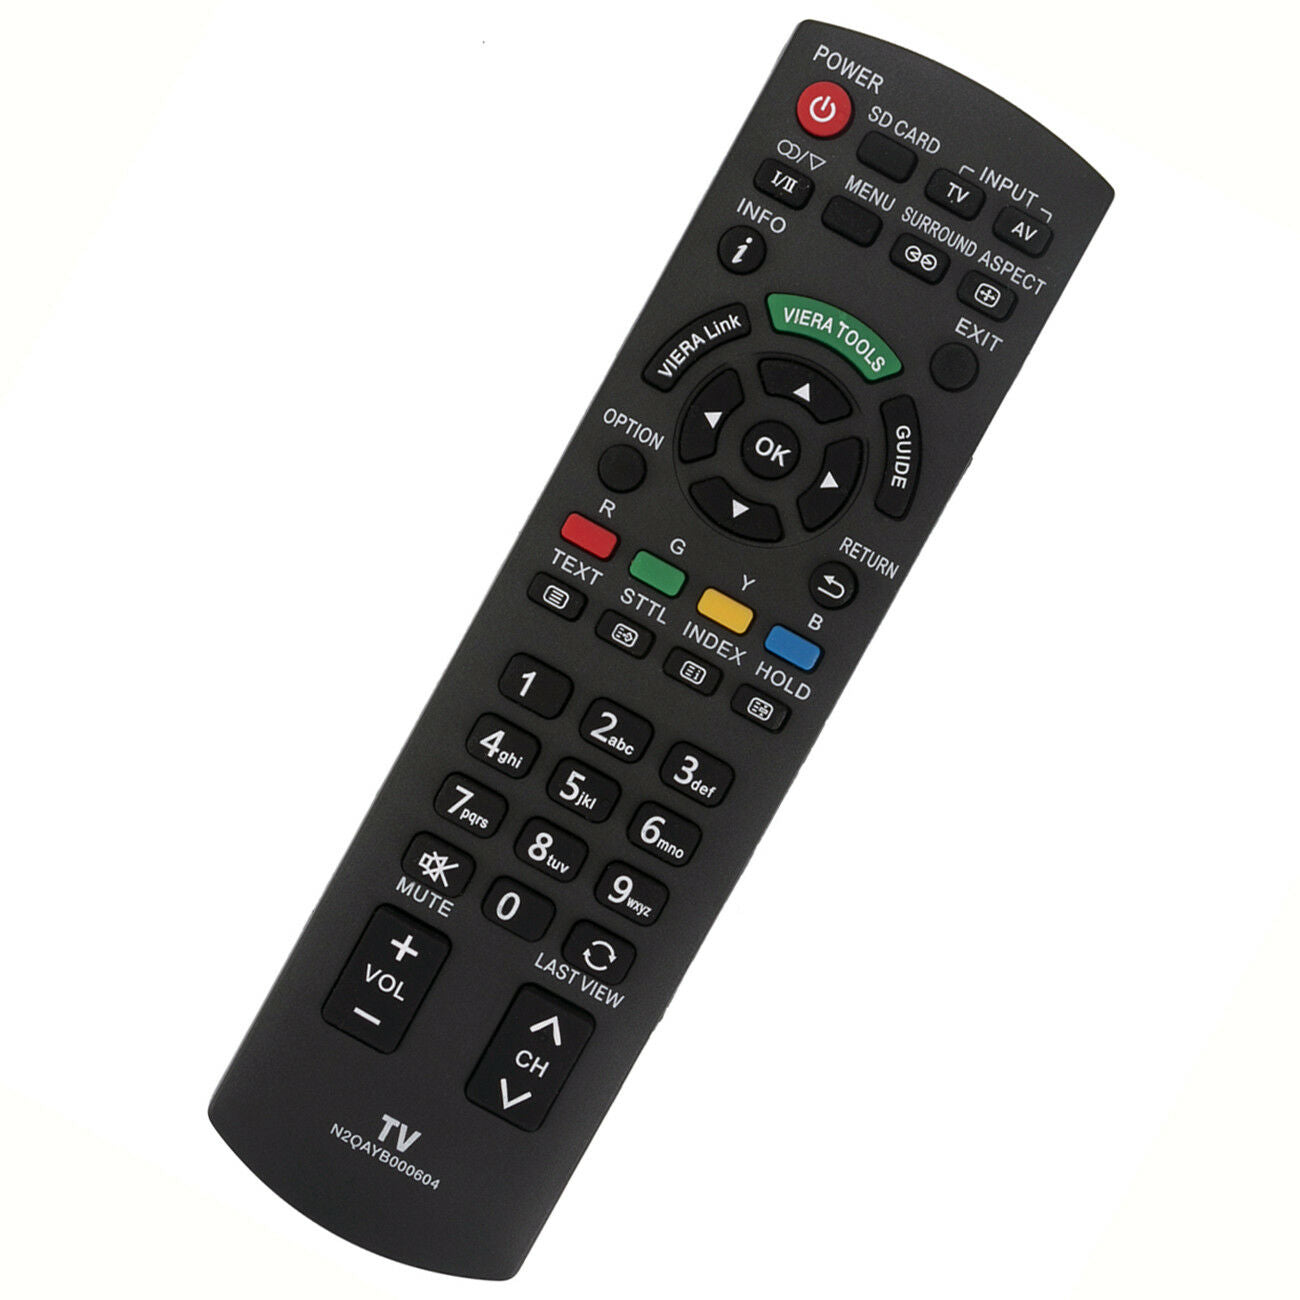 N2QAYB000604 Remote Replacement for Panasonic TV THL42U30A